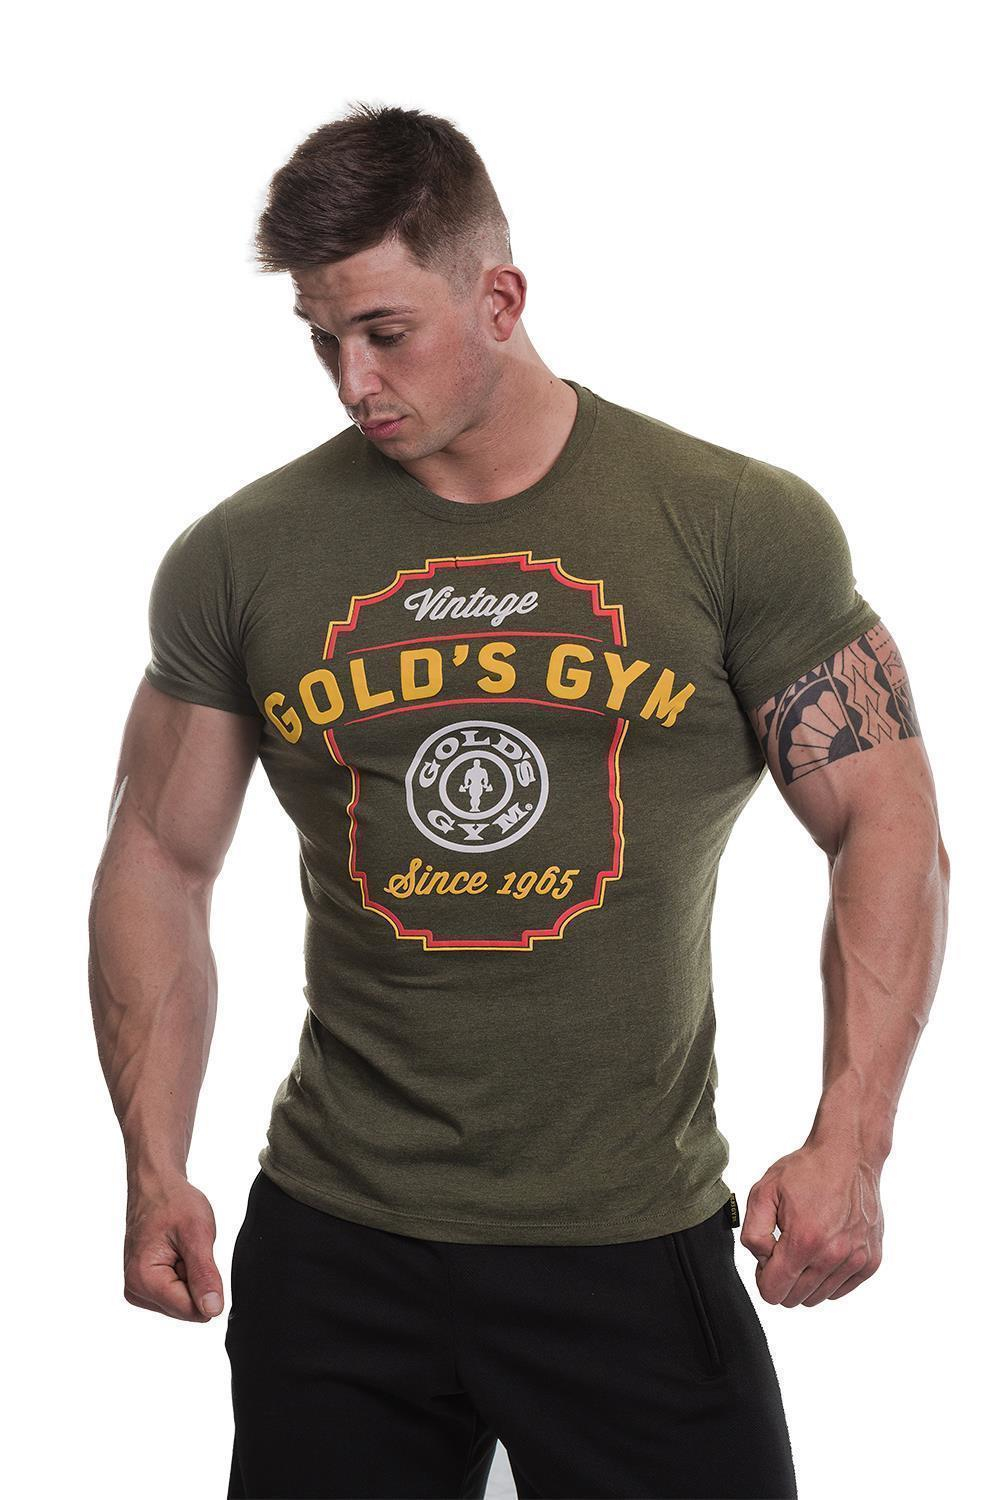 Golds Gym Printed Vintage Style T-Shirt Army Marlin Bodybuilding Fitn,  24,95 €